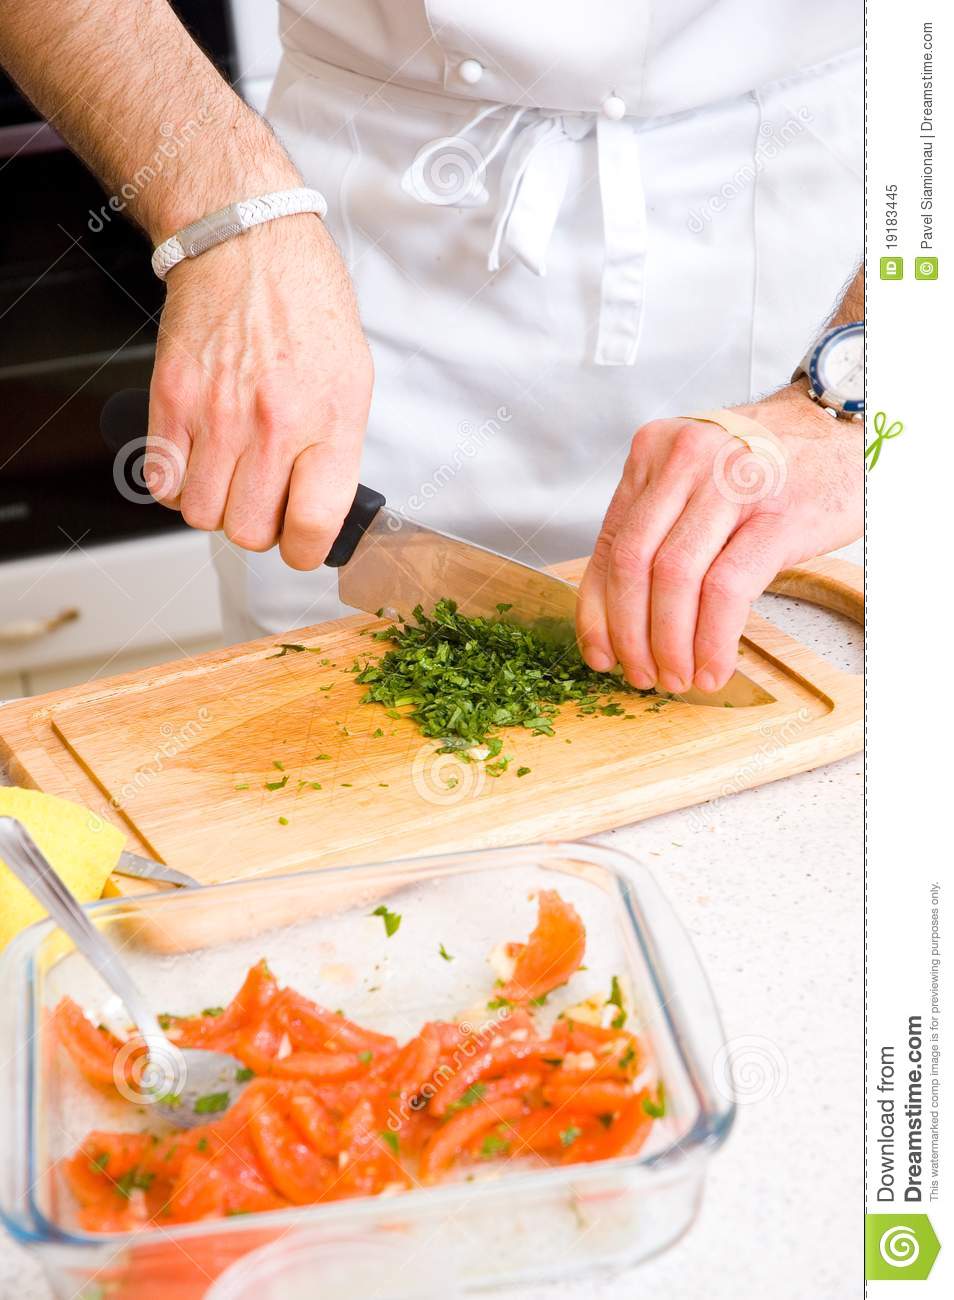 Chef Cutting The Parsley Royalty Free Stock Photo   Image  19183445